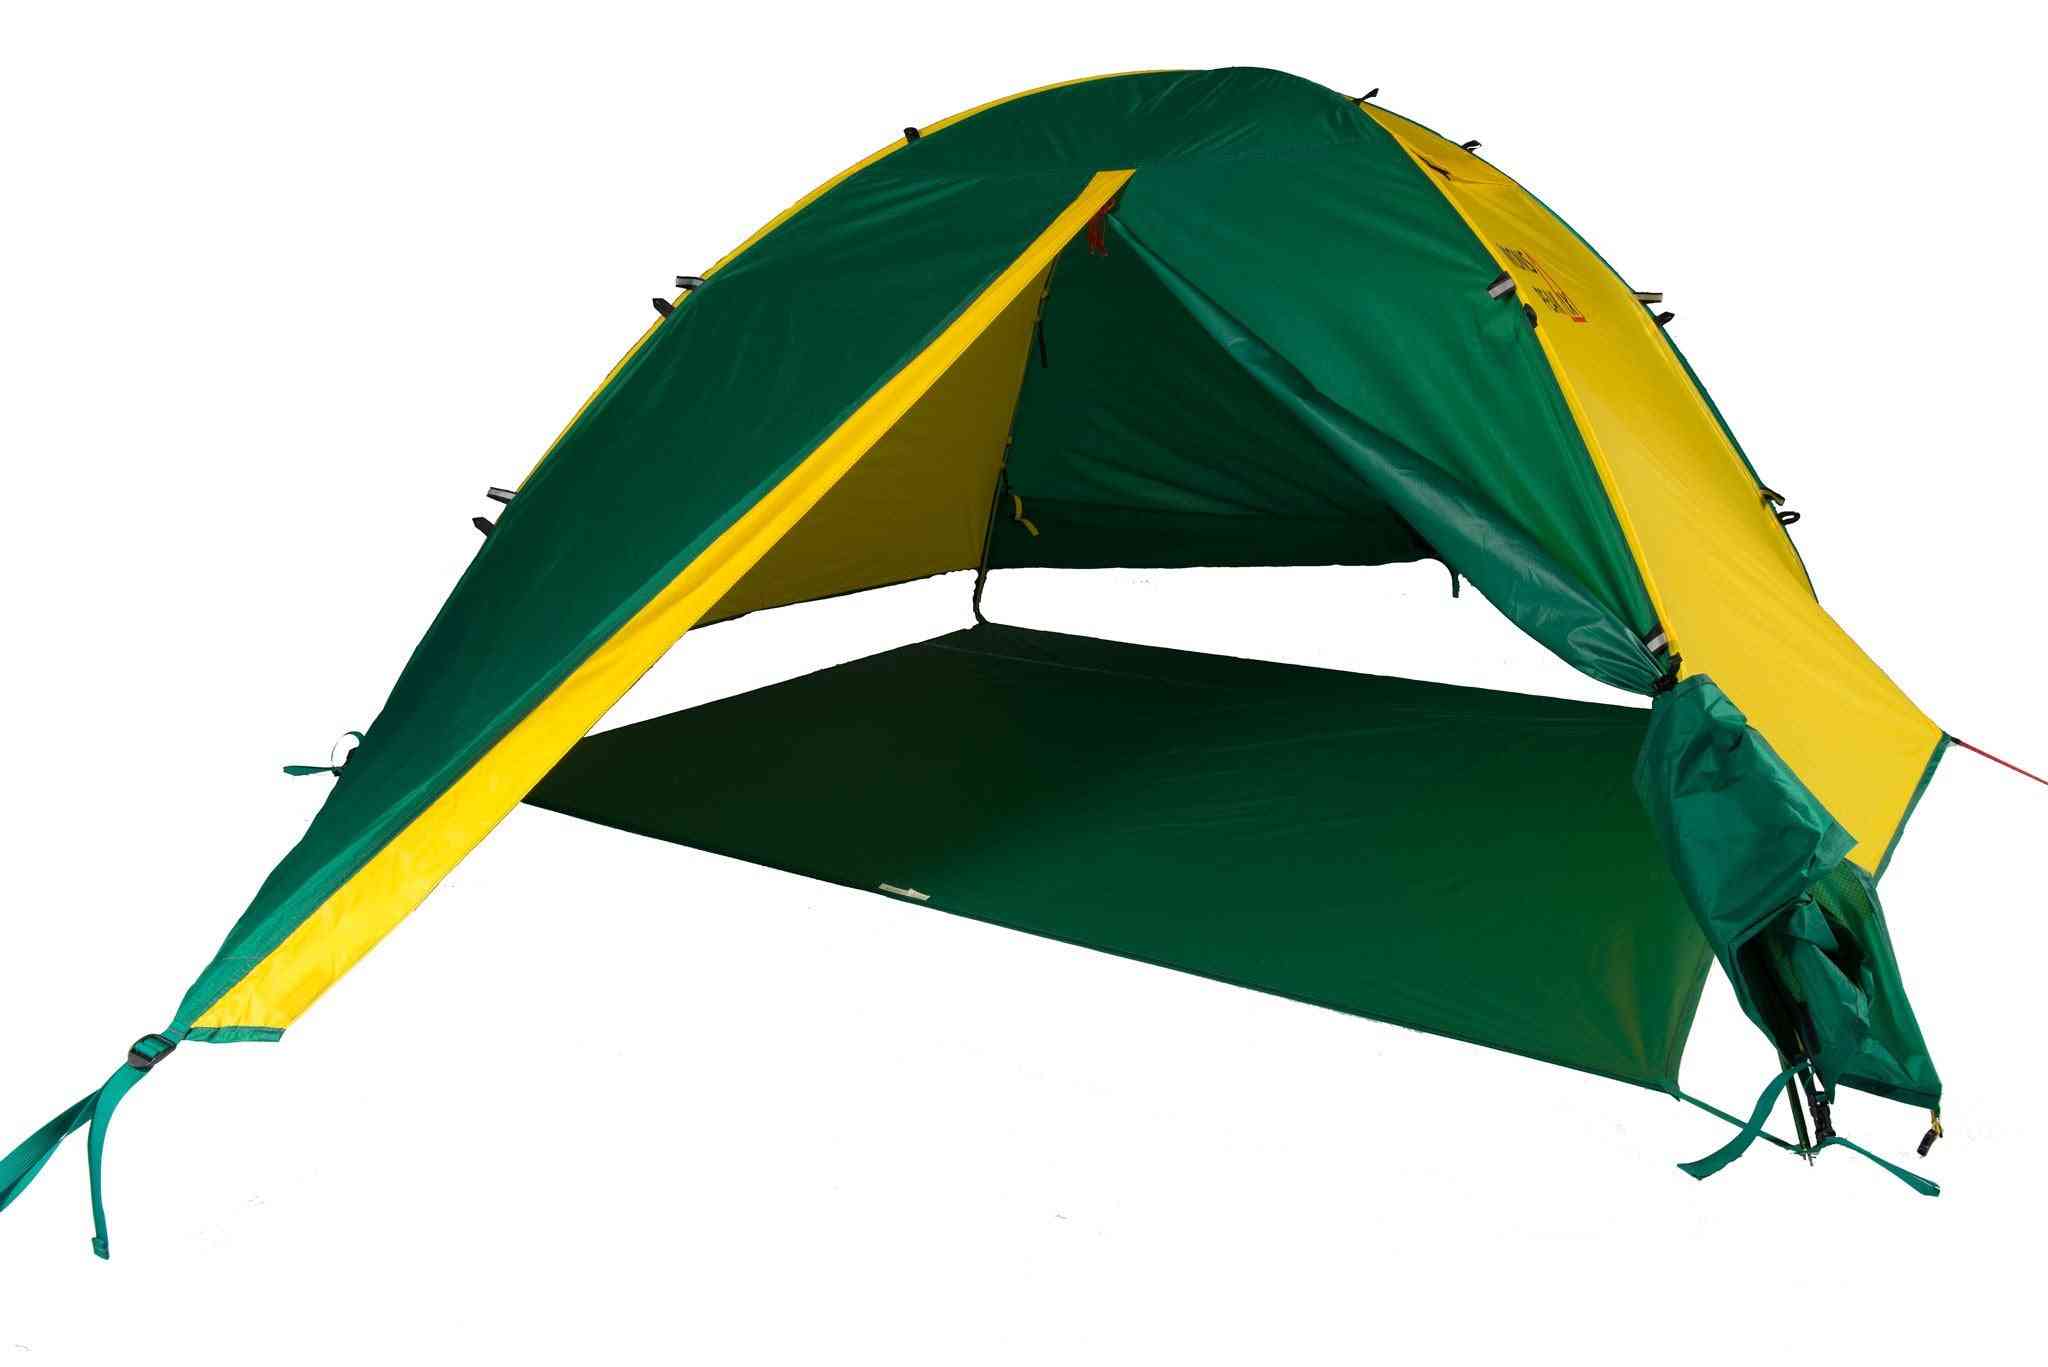 Camping & Hiking Tents For Trail 43 2-in-1 Tent